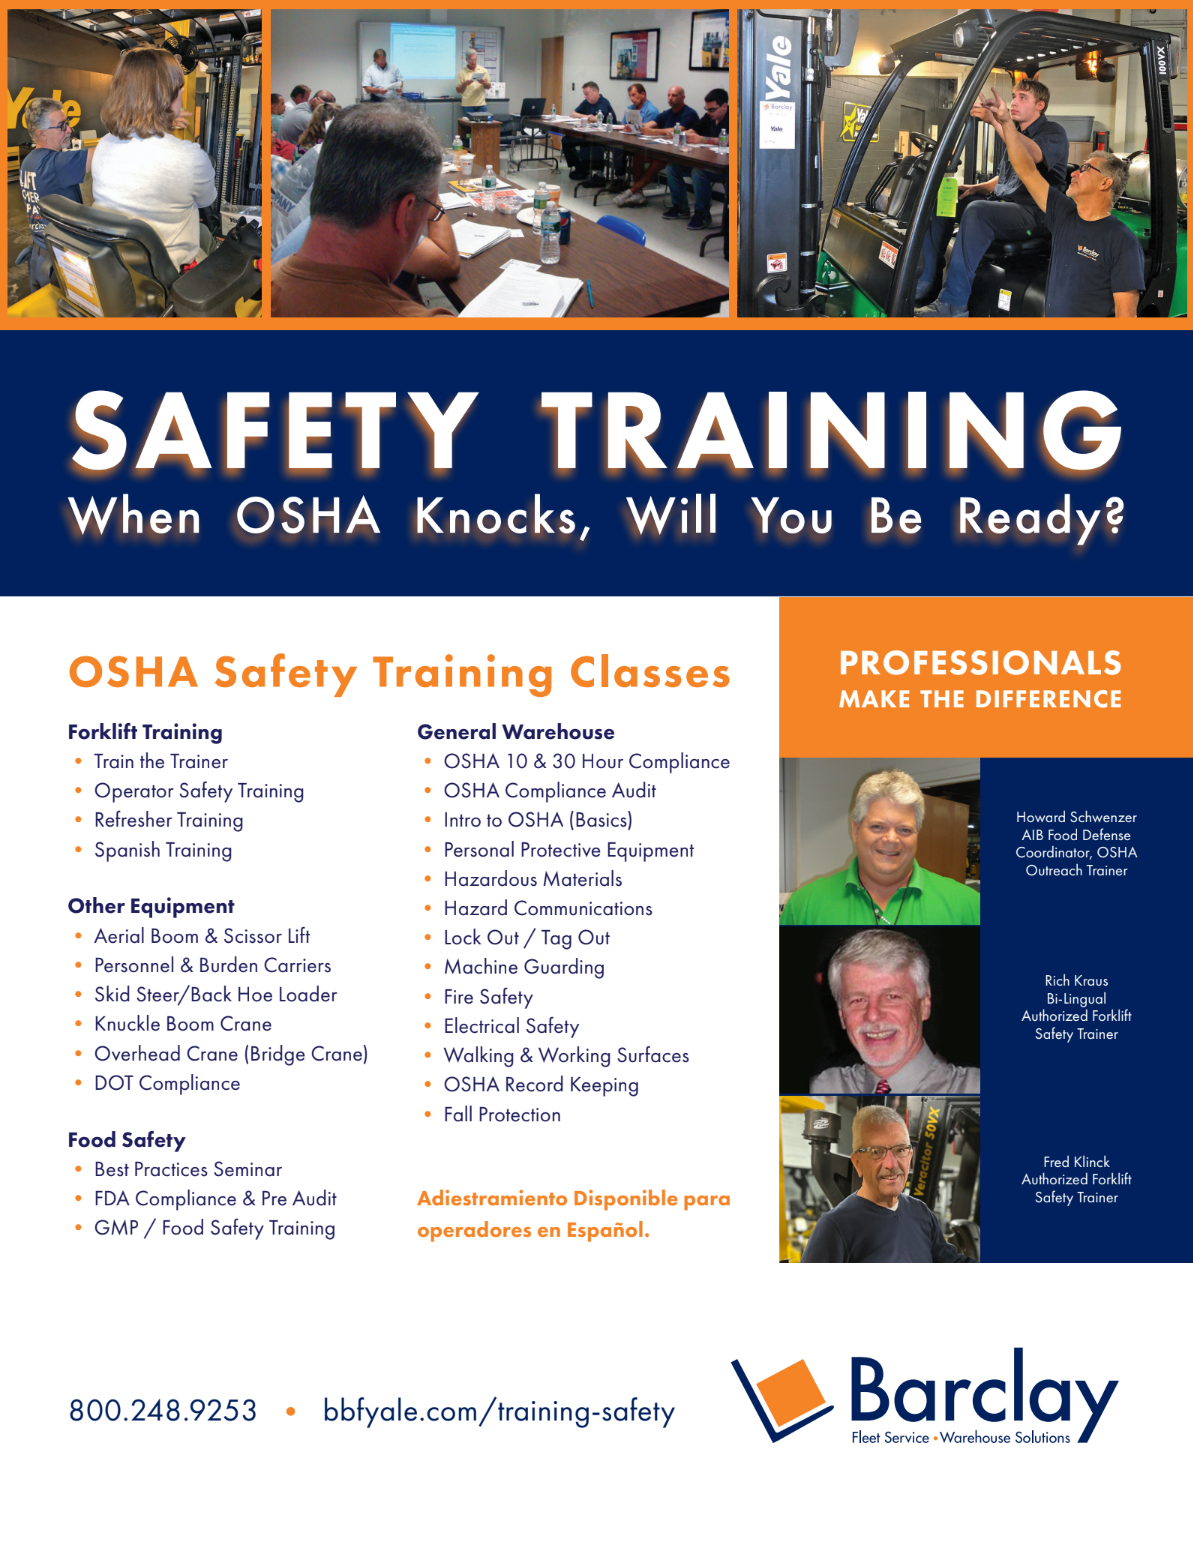 List of safety training classes that Barclay offers.